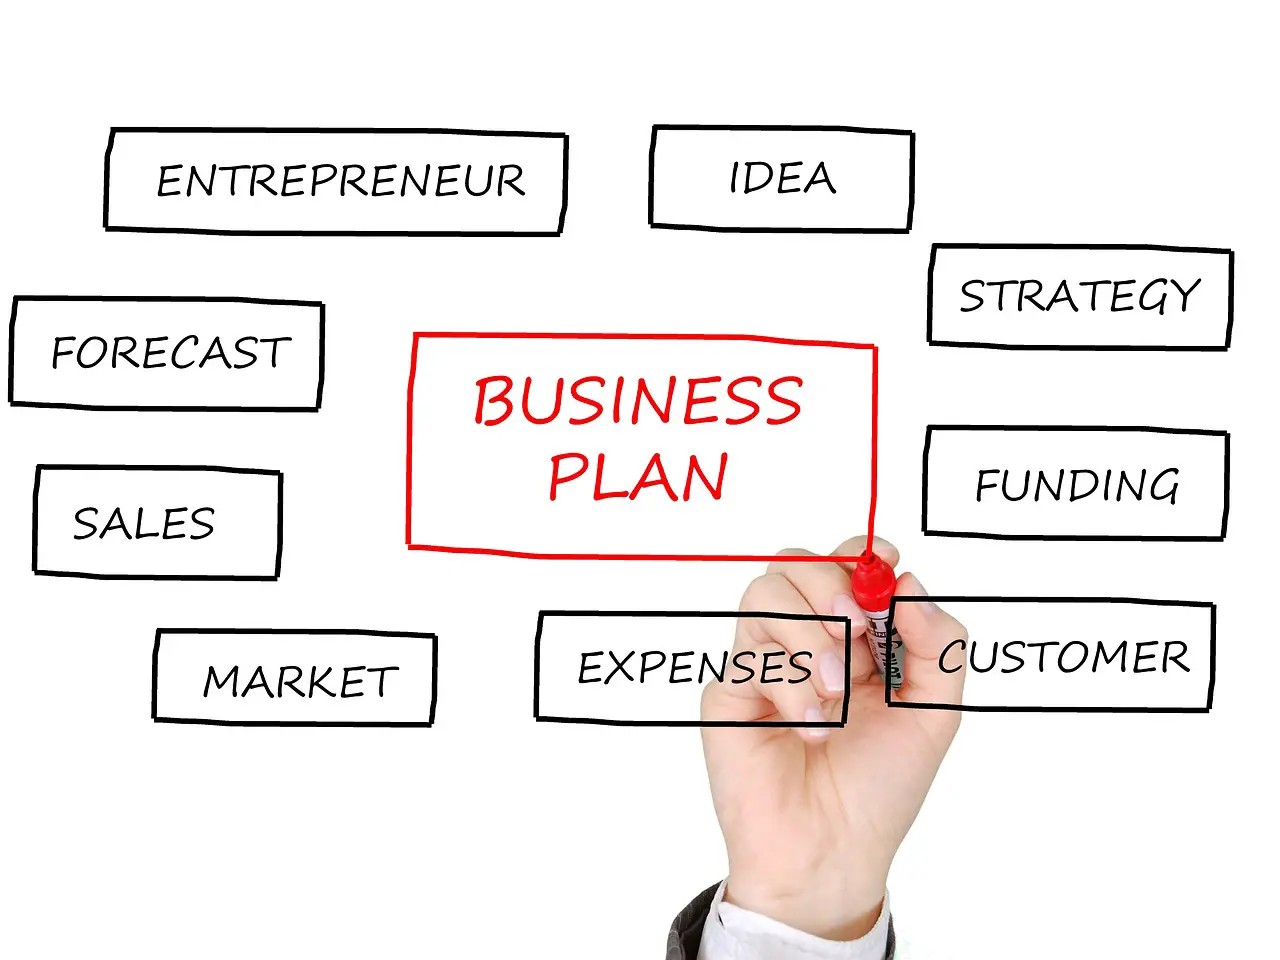 Writers of business plans